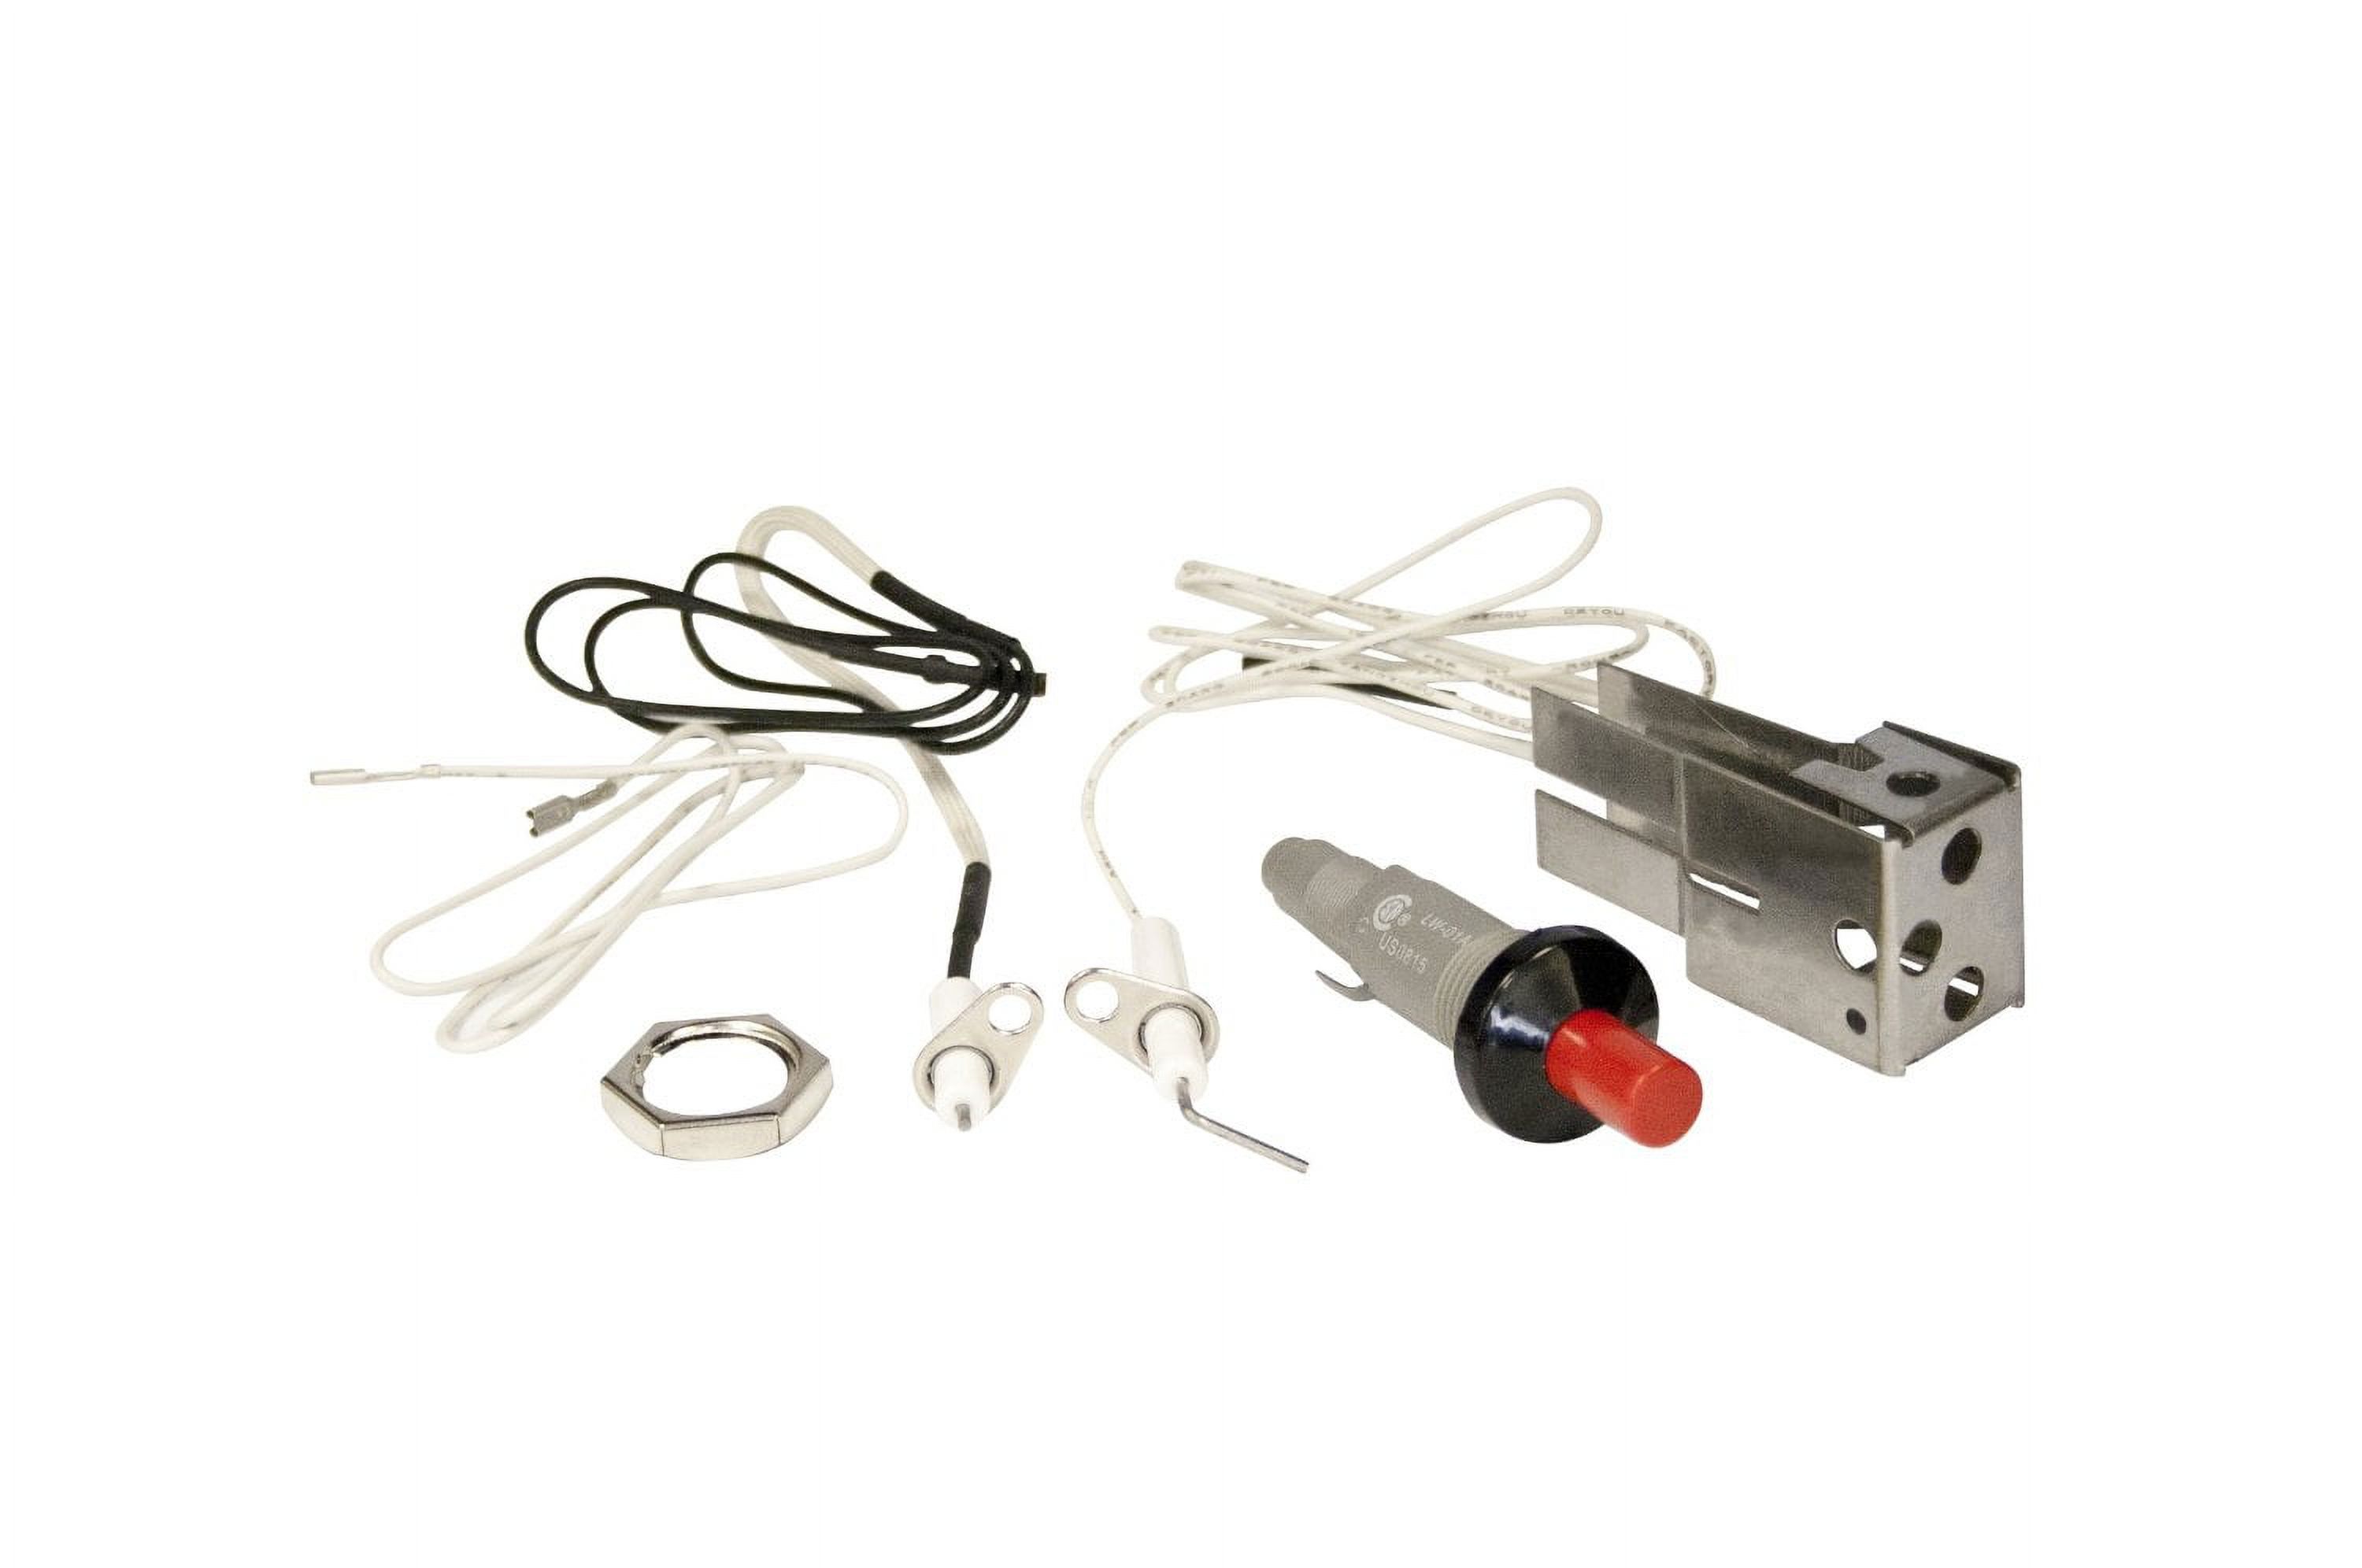 GrillPro Universal Gas Grill Push Button Replacement Igniter Kit 20610 - image 1 of 2